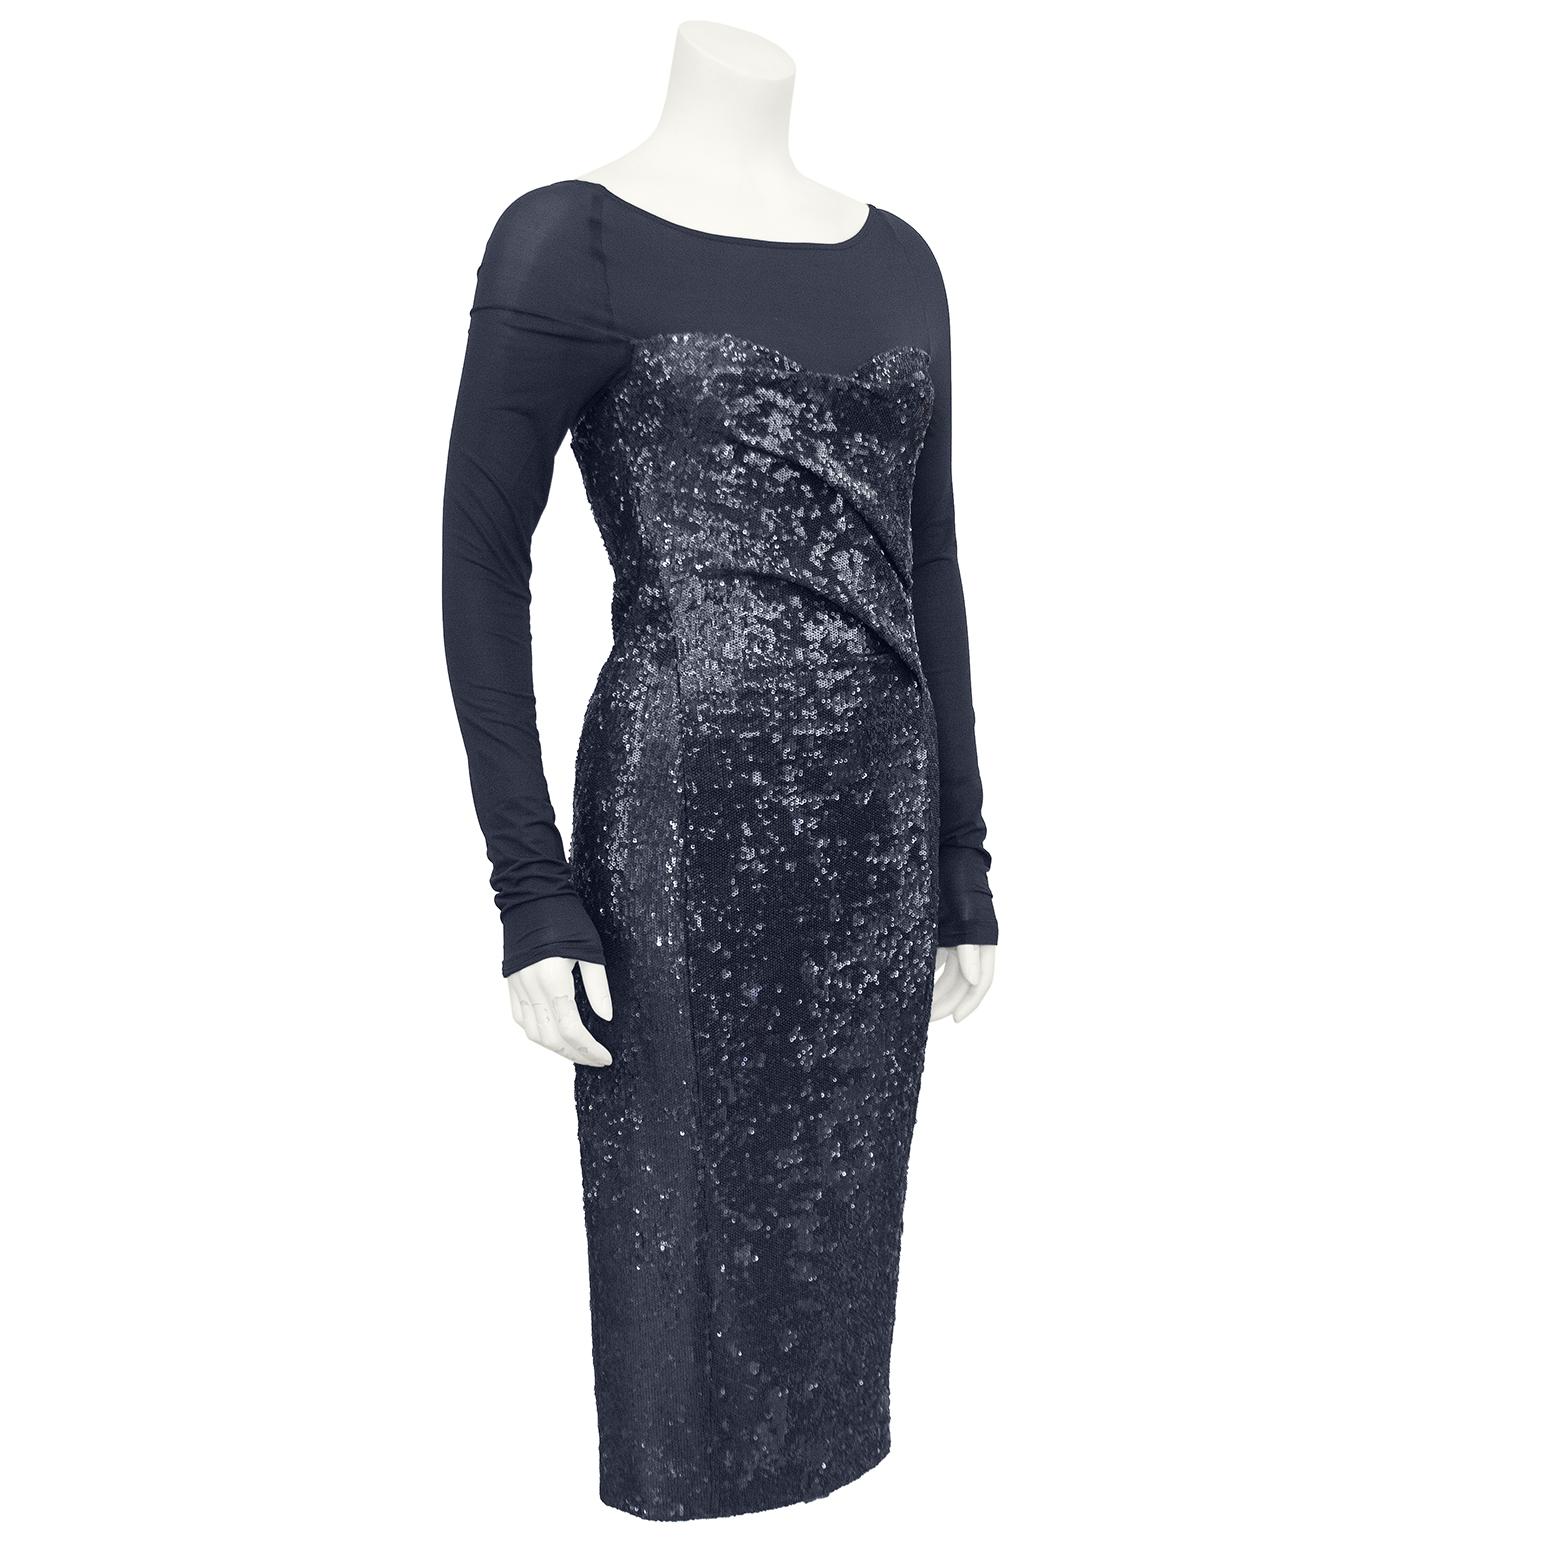 Very chic Donna Karan cocktail dress from the 1990s. Sheer charcoal grey sleeves and yoke that give the illusion of a sheer body suit under a strapless sequin dress. The charcoal grey sequin body has a twisted sweetheart neckline, is fitted through